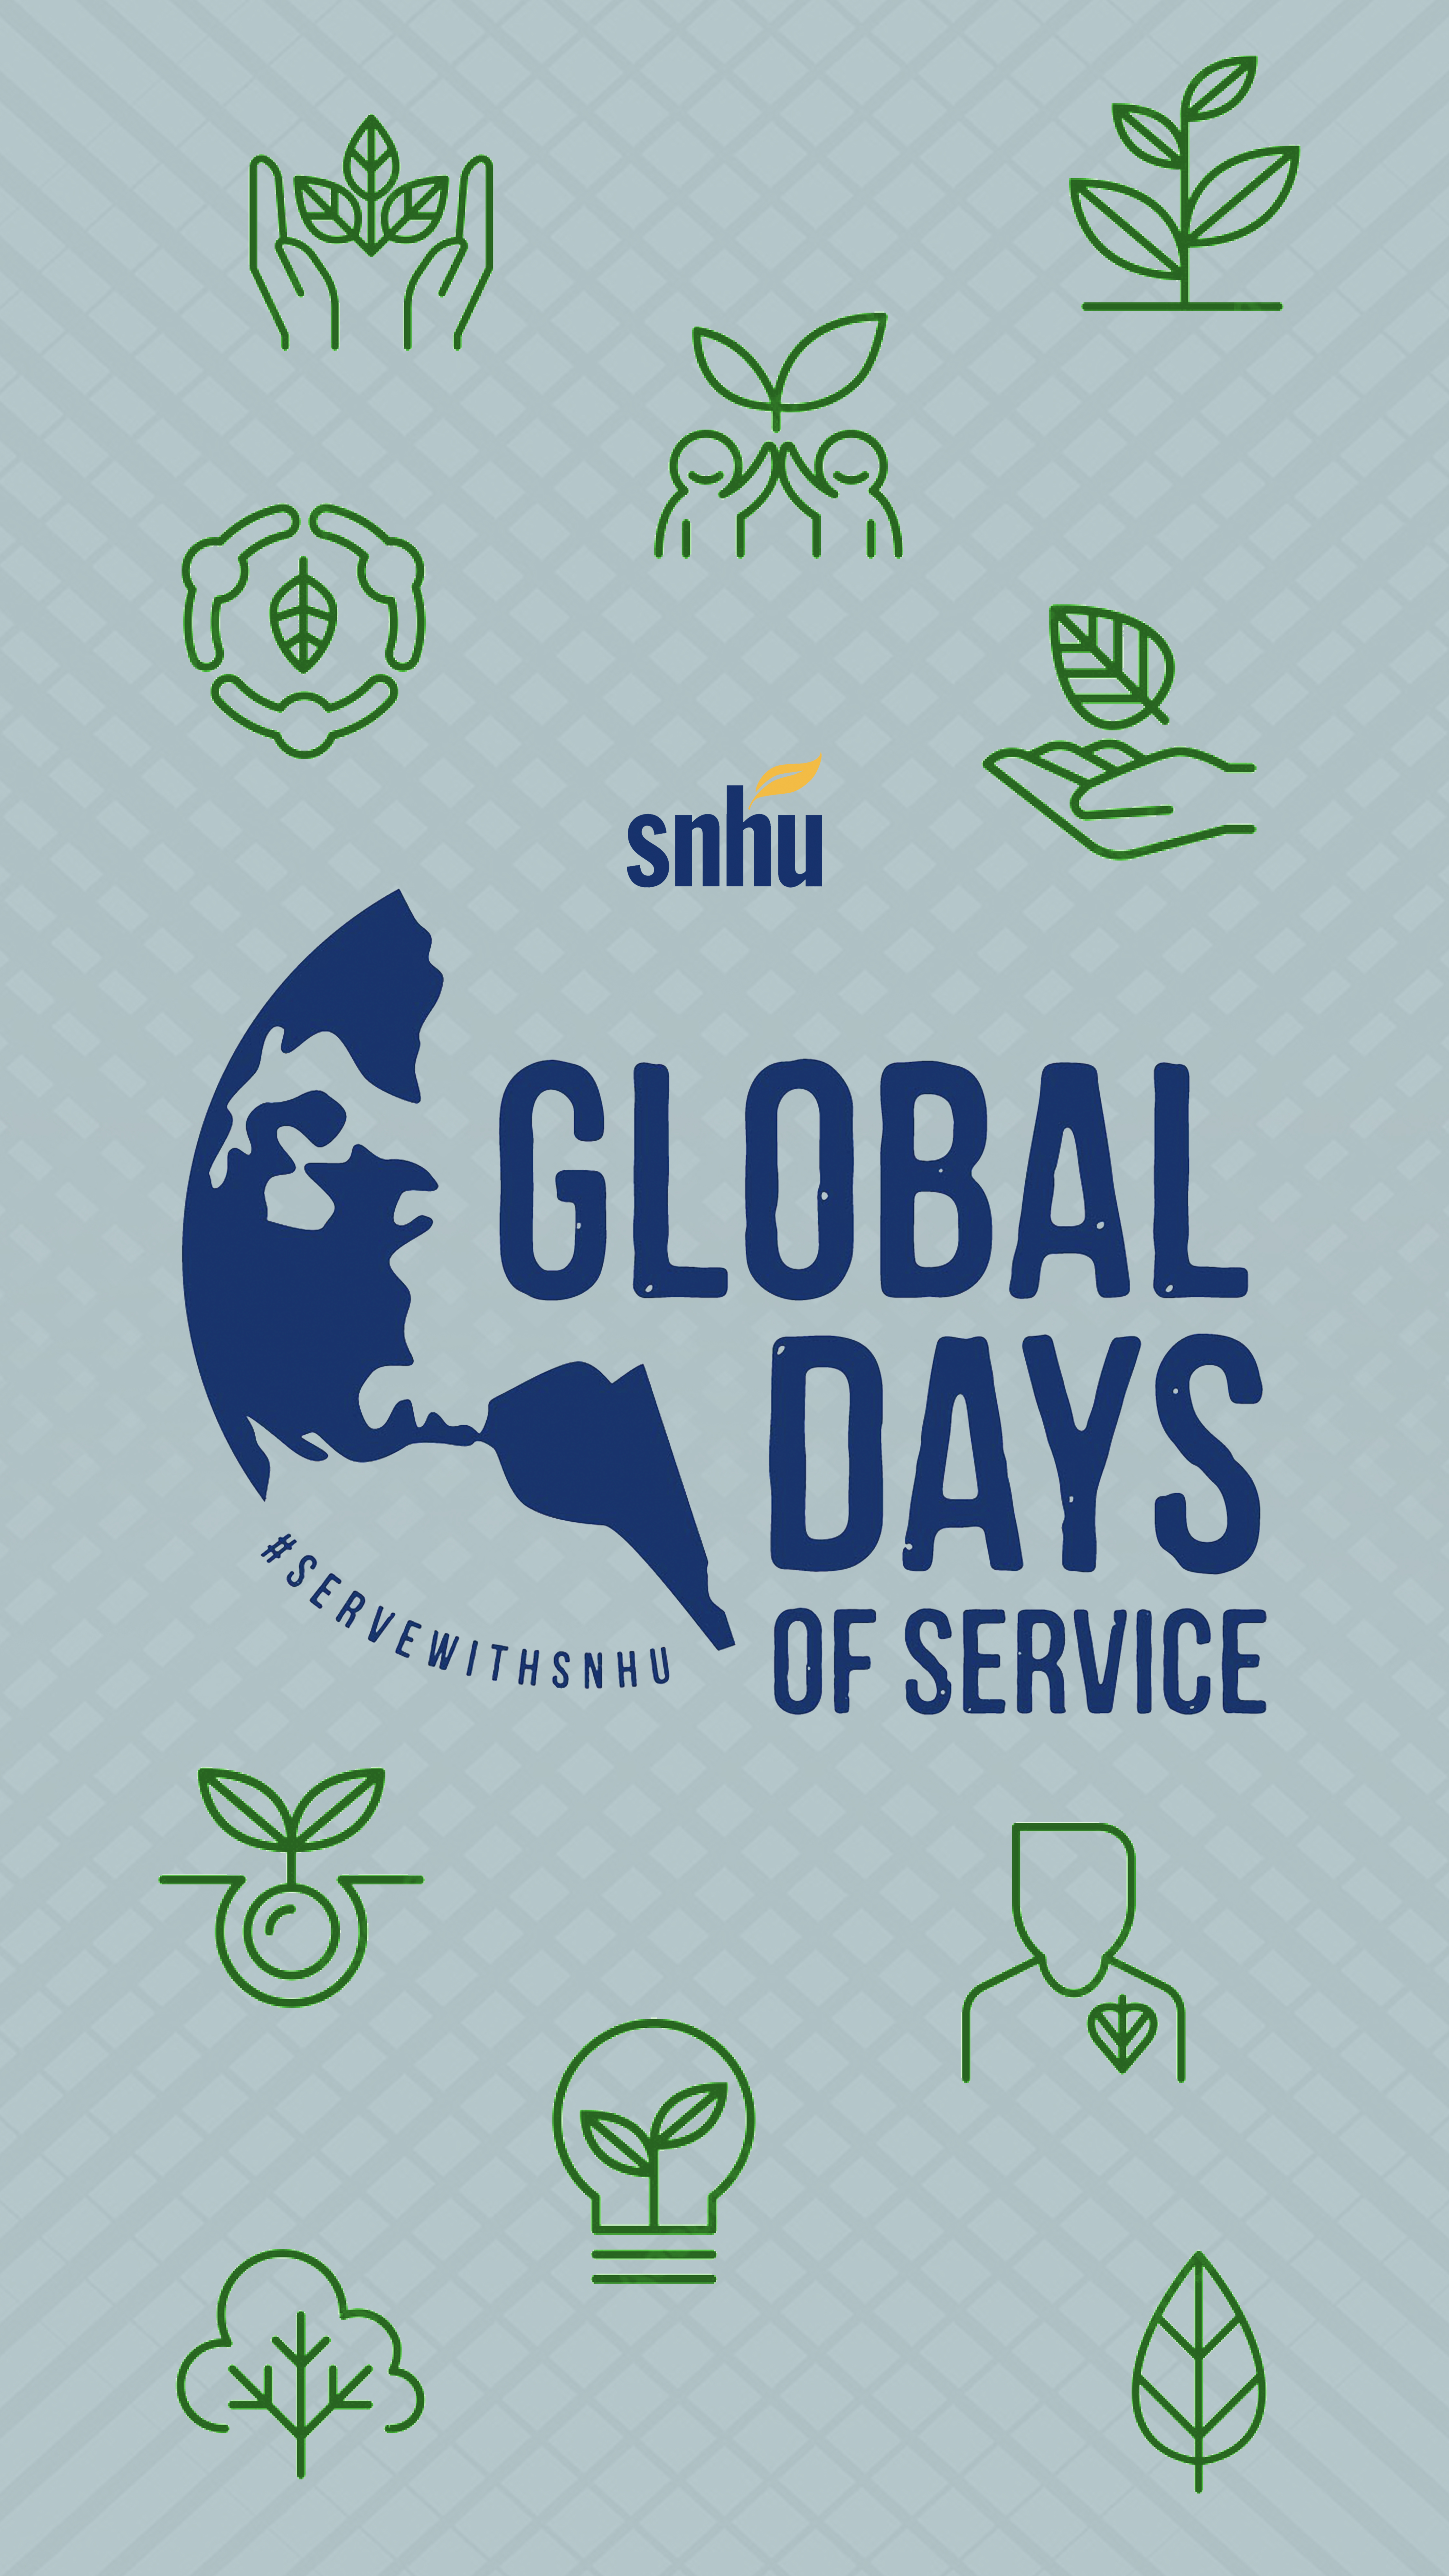 Environmental icons surround logo that reads SNHU Global Days of Service